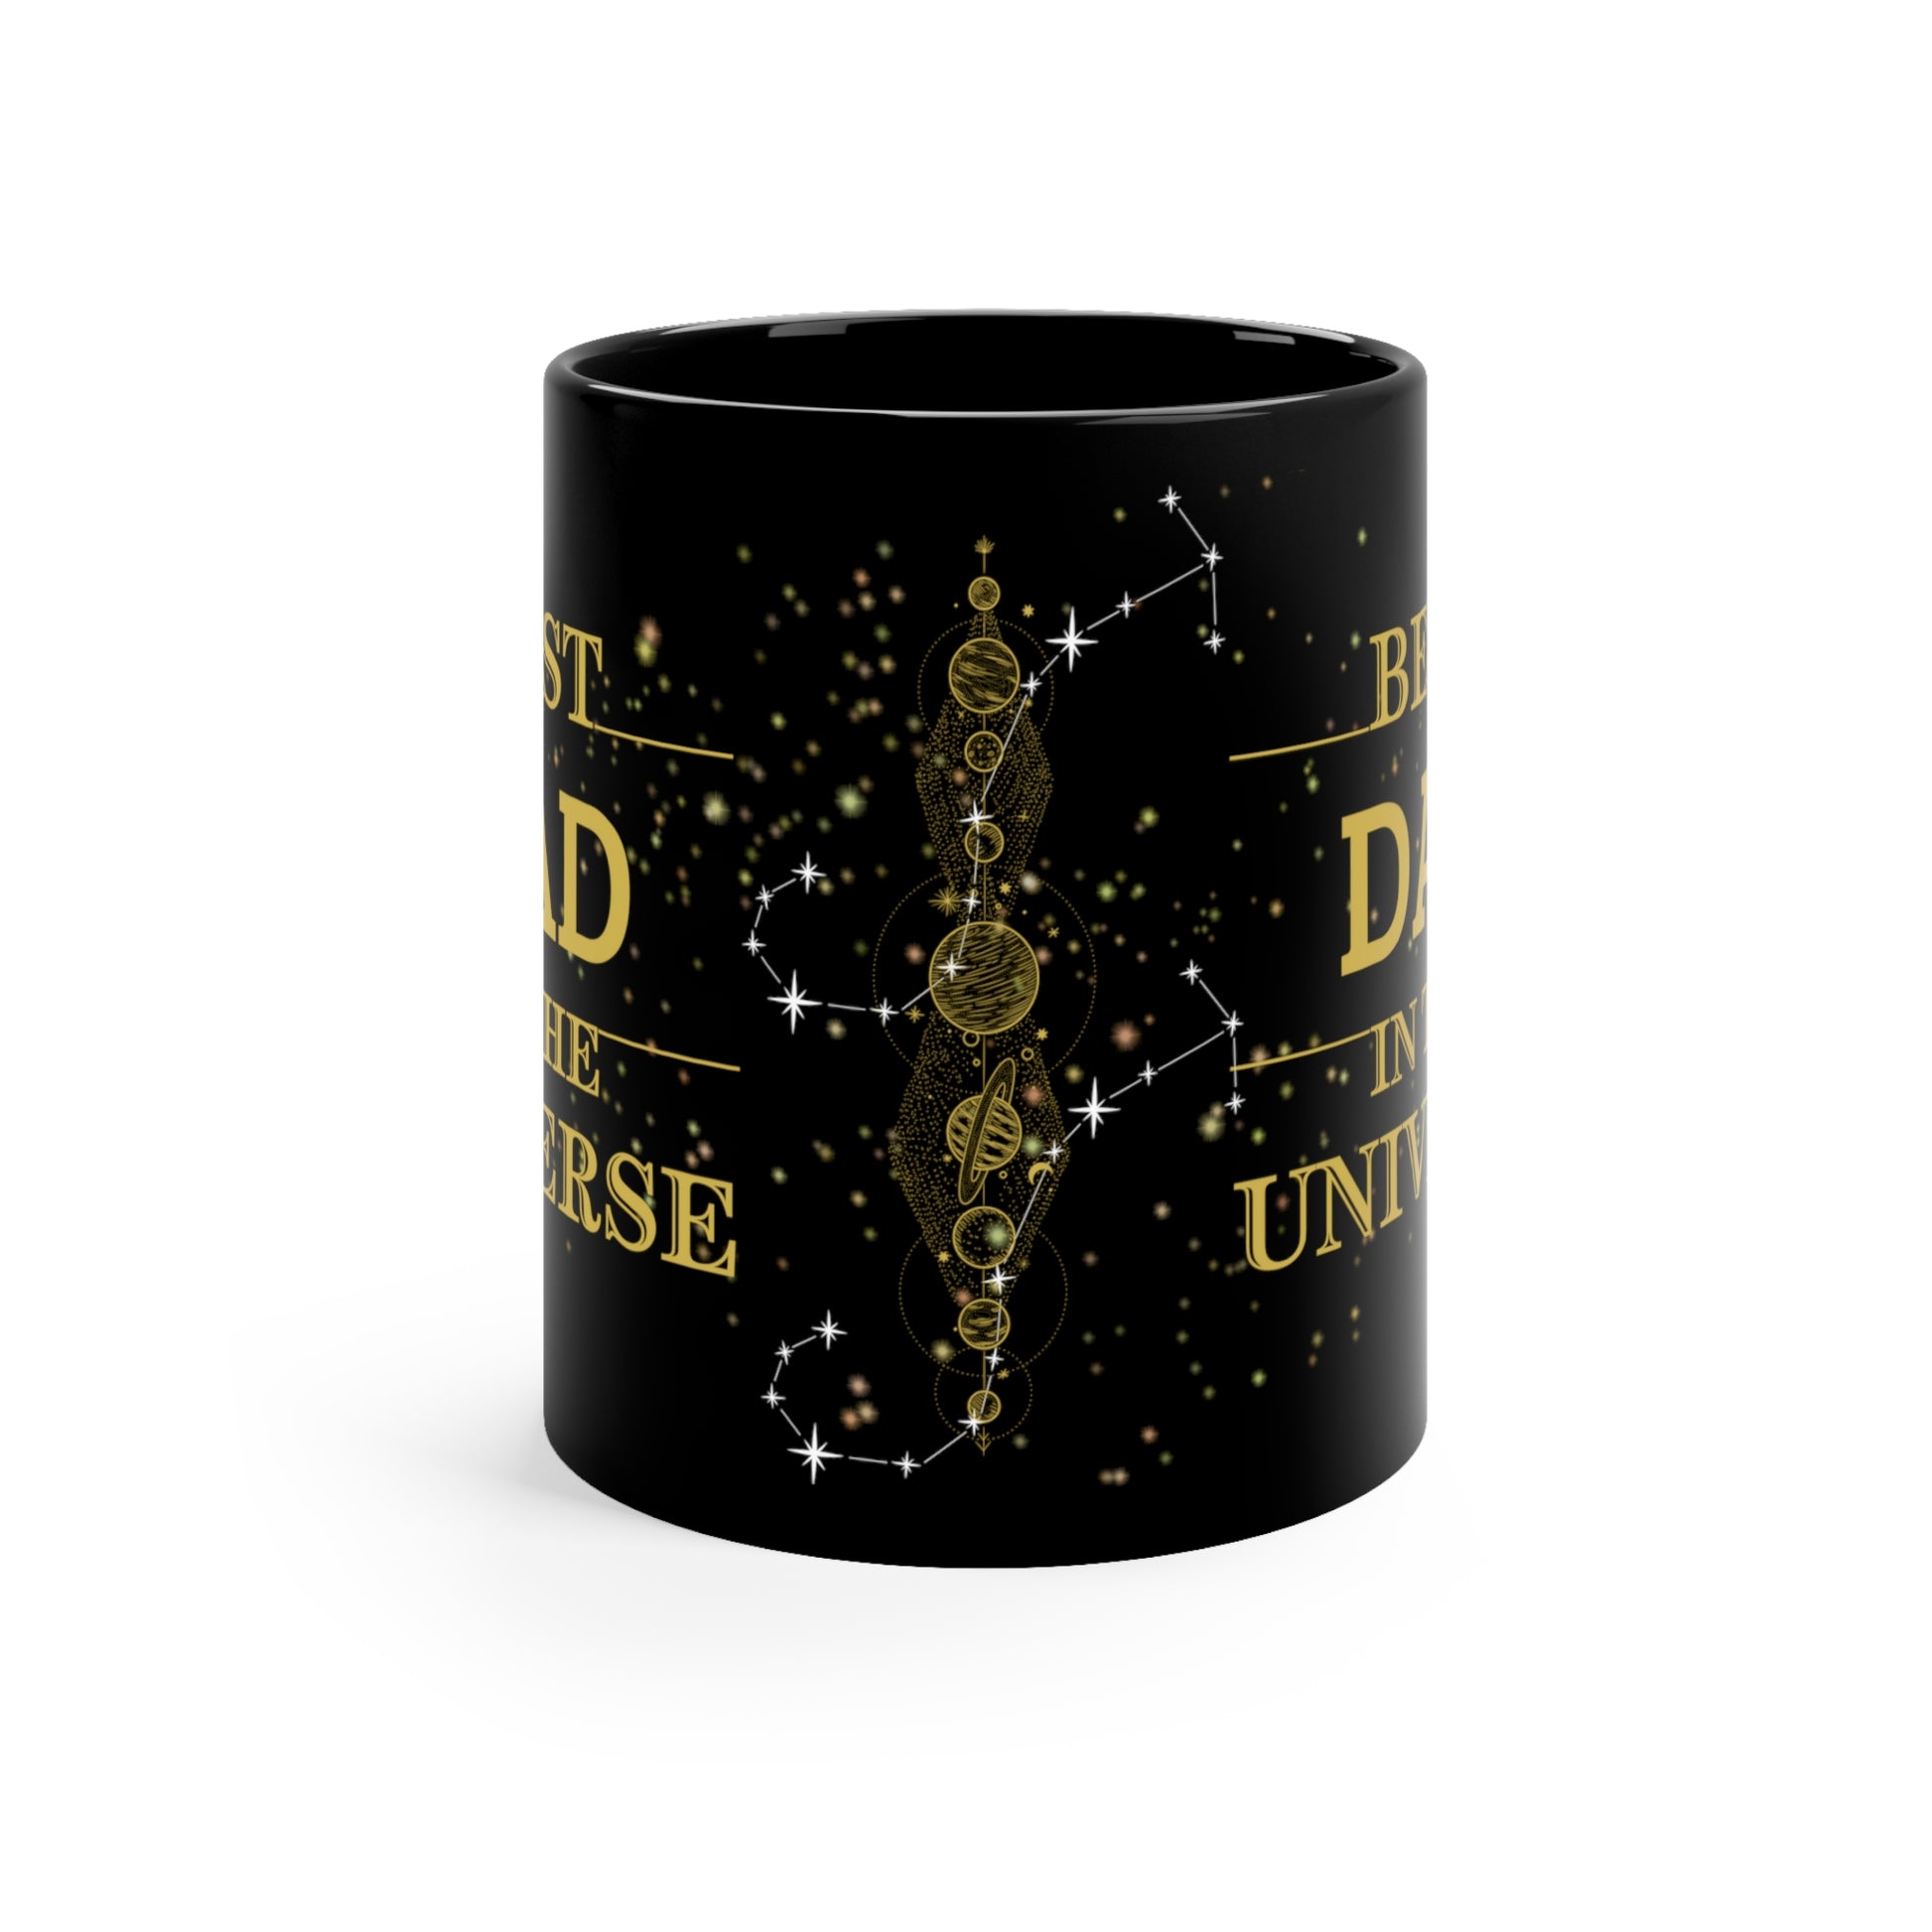 Best Dad In The Universe Mug, Best Gift for Dad Ever